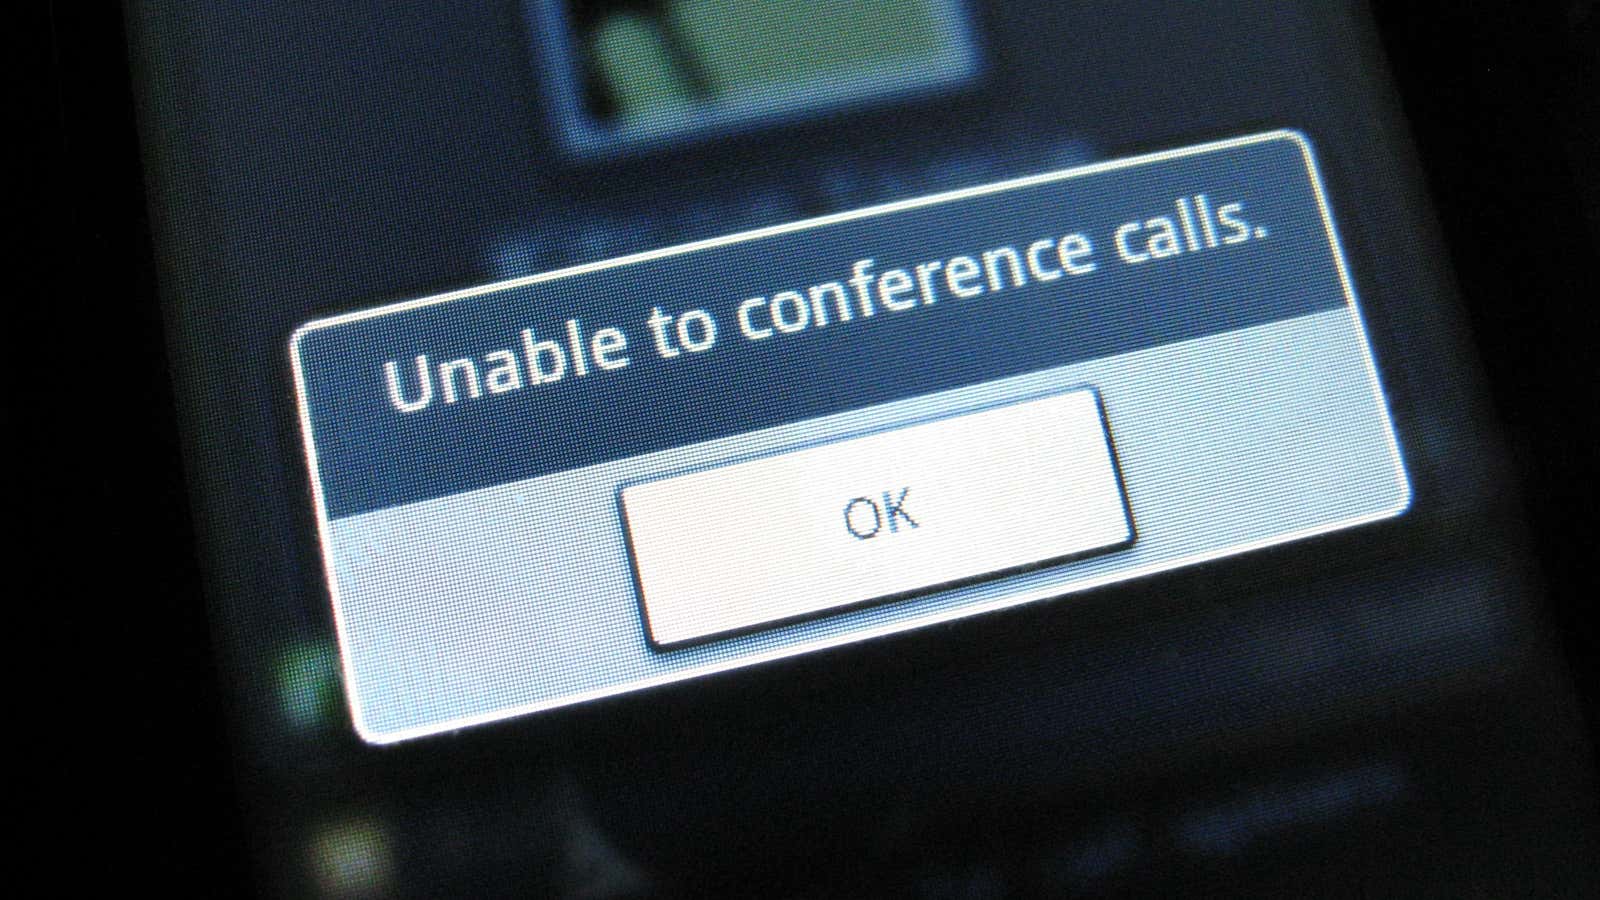 No. Be able to conference calls.